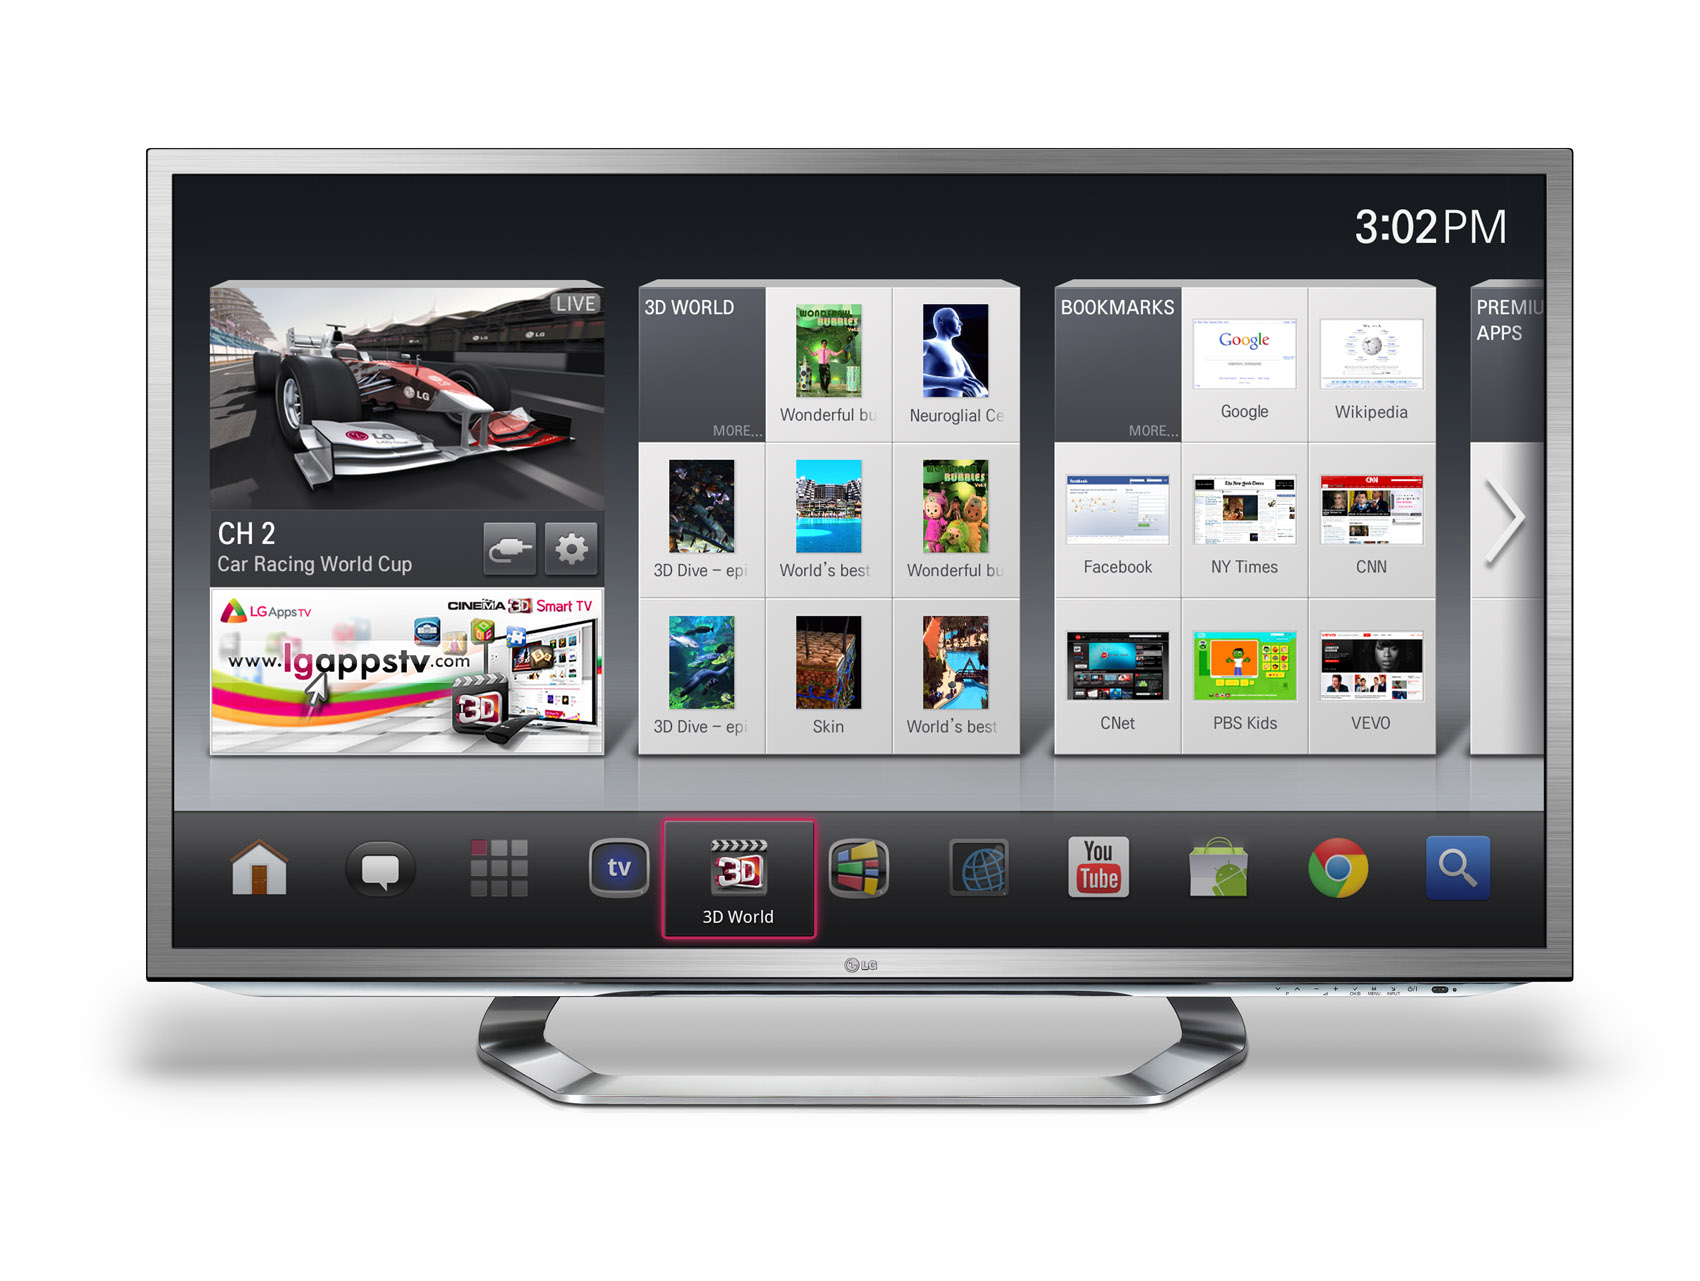 Front view of the LG Google TV displaying Google Android OS